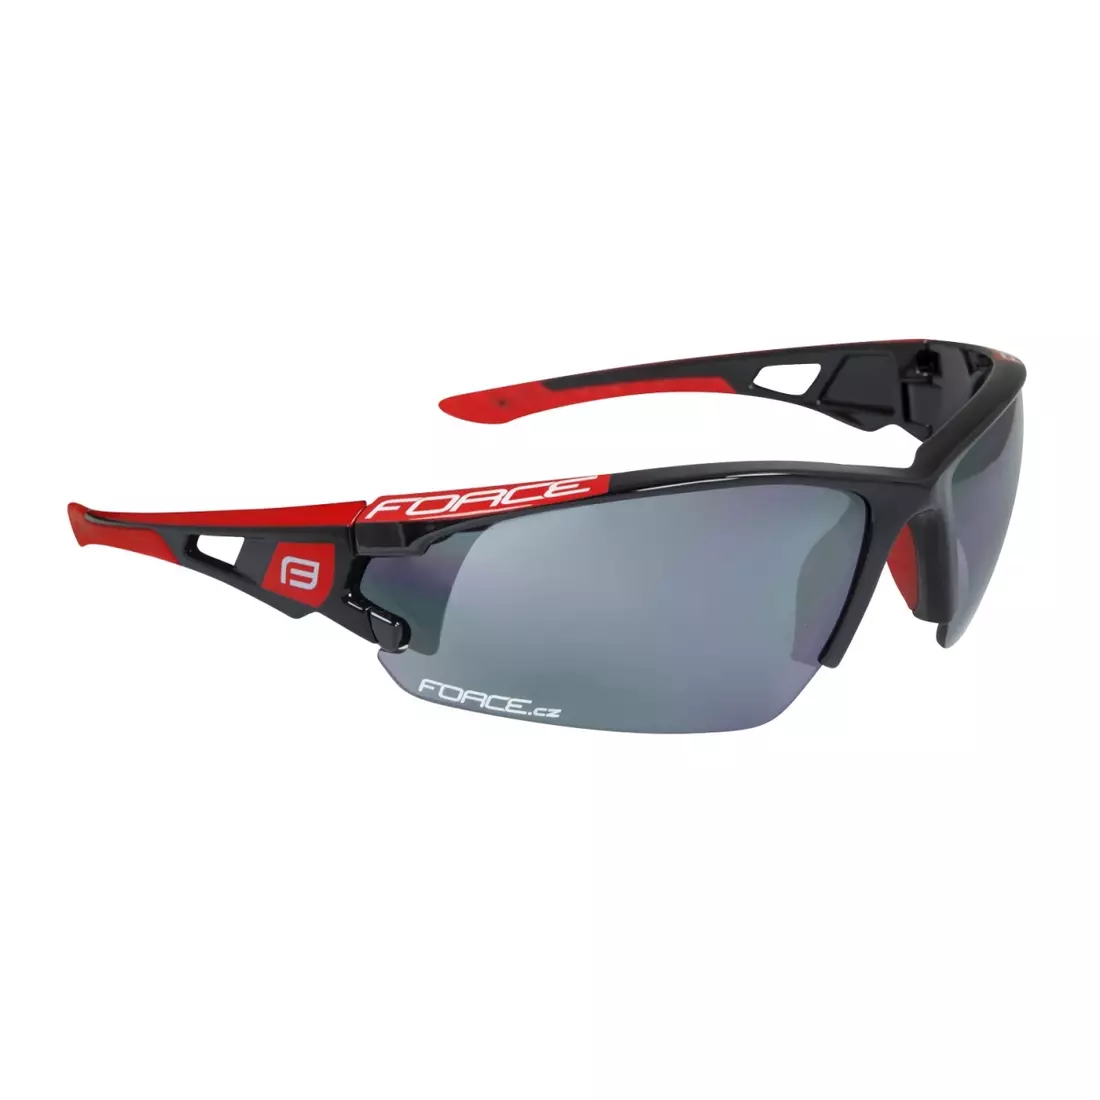 FORCE sports glasses with replaceable lenses CALIBRE, black and red 91053